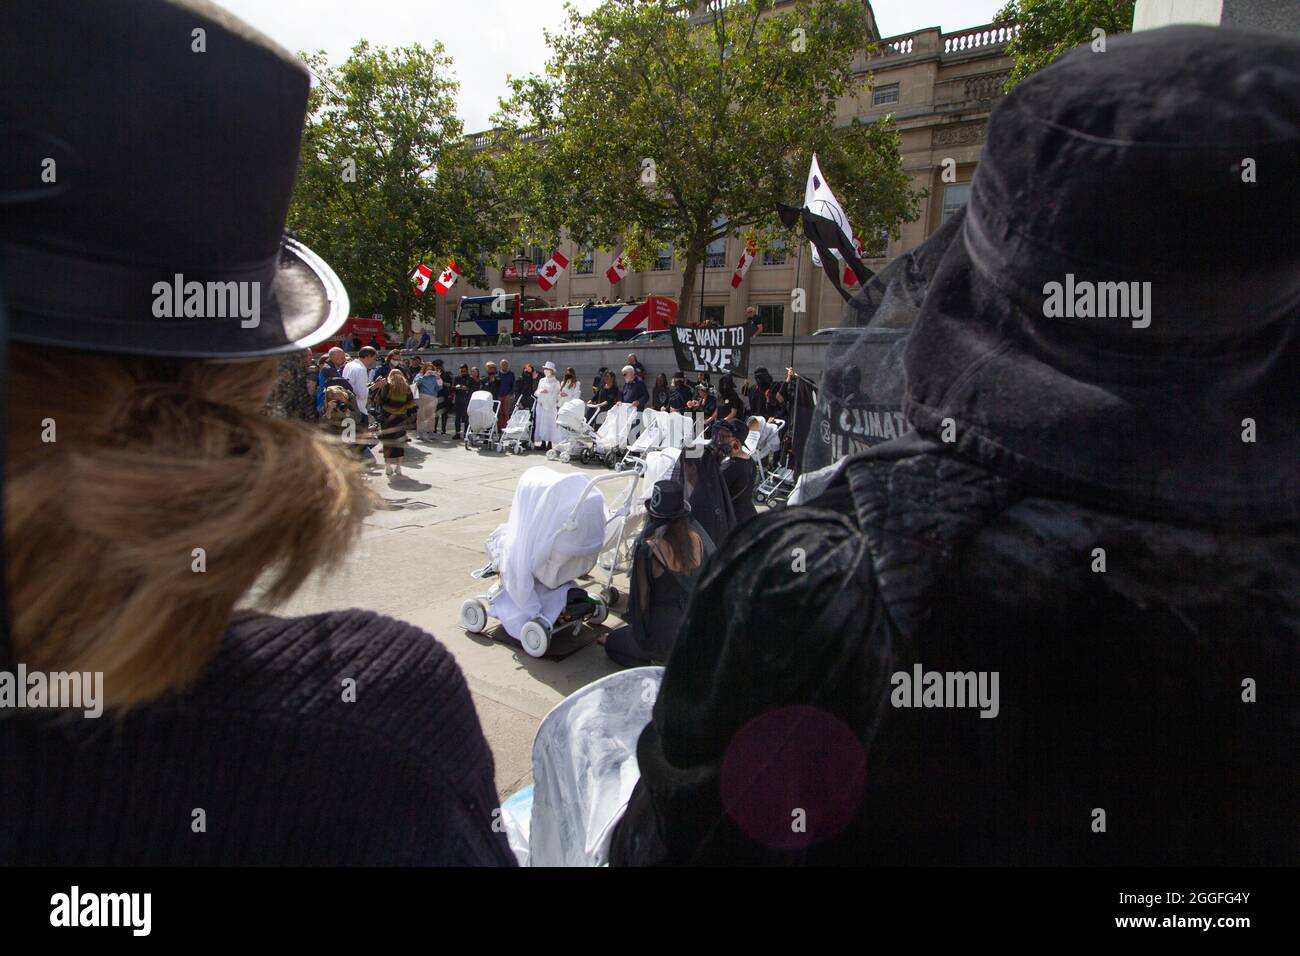 Extinction Rebellion activists London 31 August 2021. Pram action protesters in Central London, walk with ghostly white prams dressed in funeral attire Stock Photo